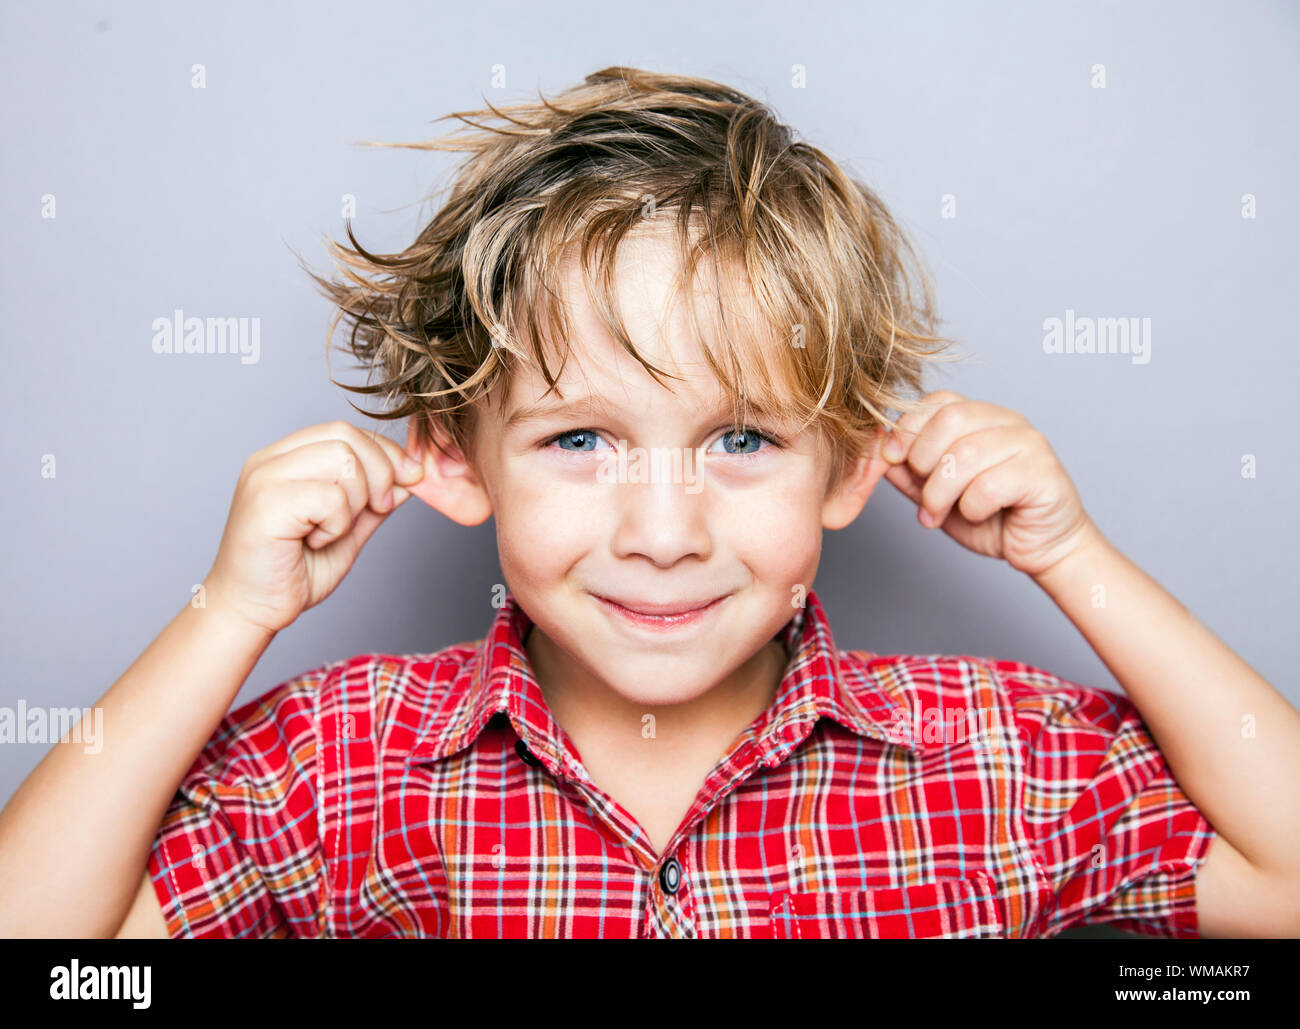 Handsome smiling boy in front of a grey background Stock Photo